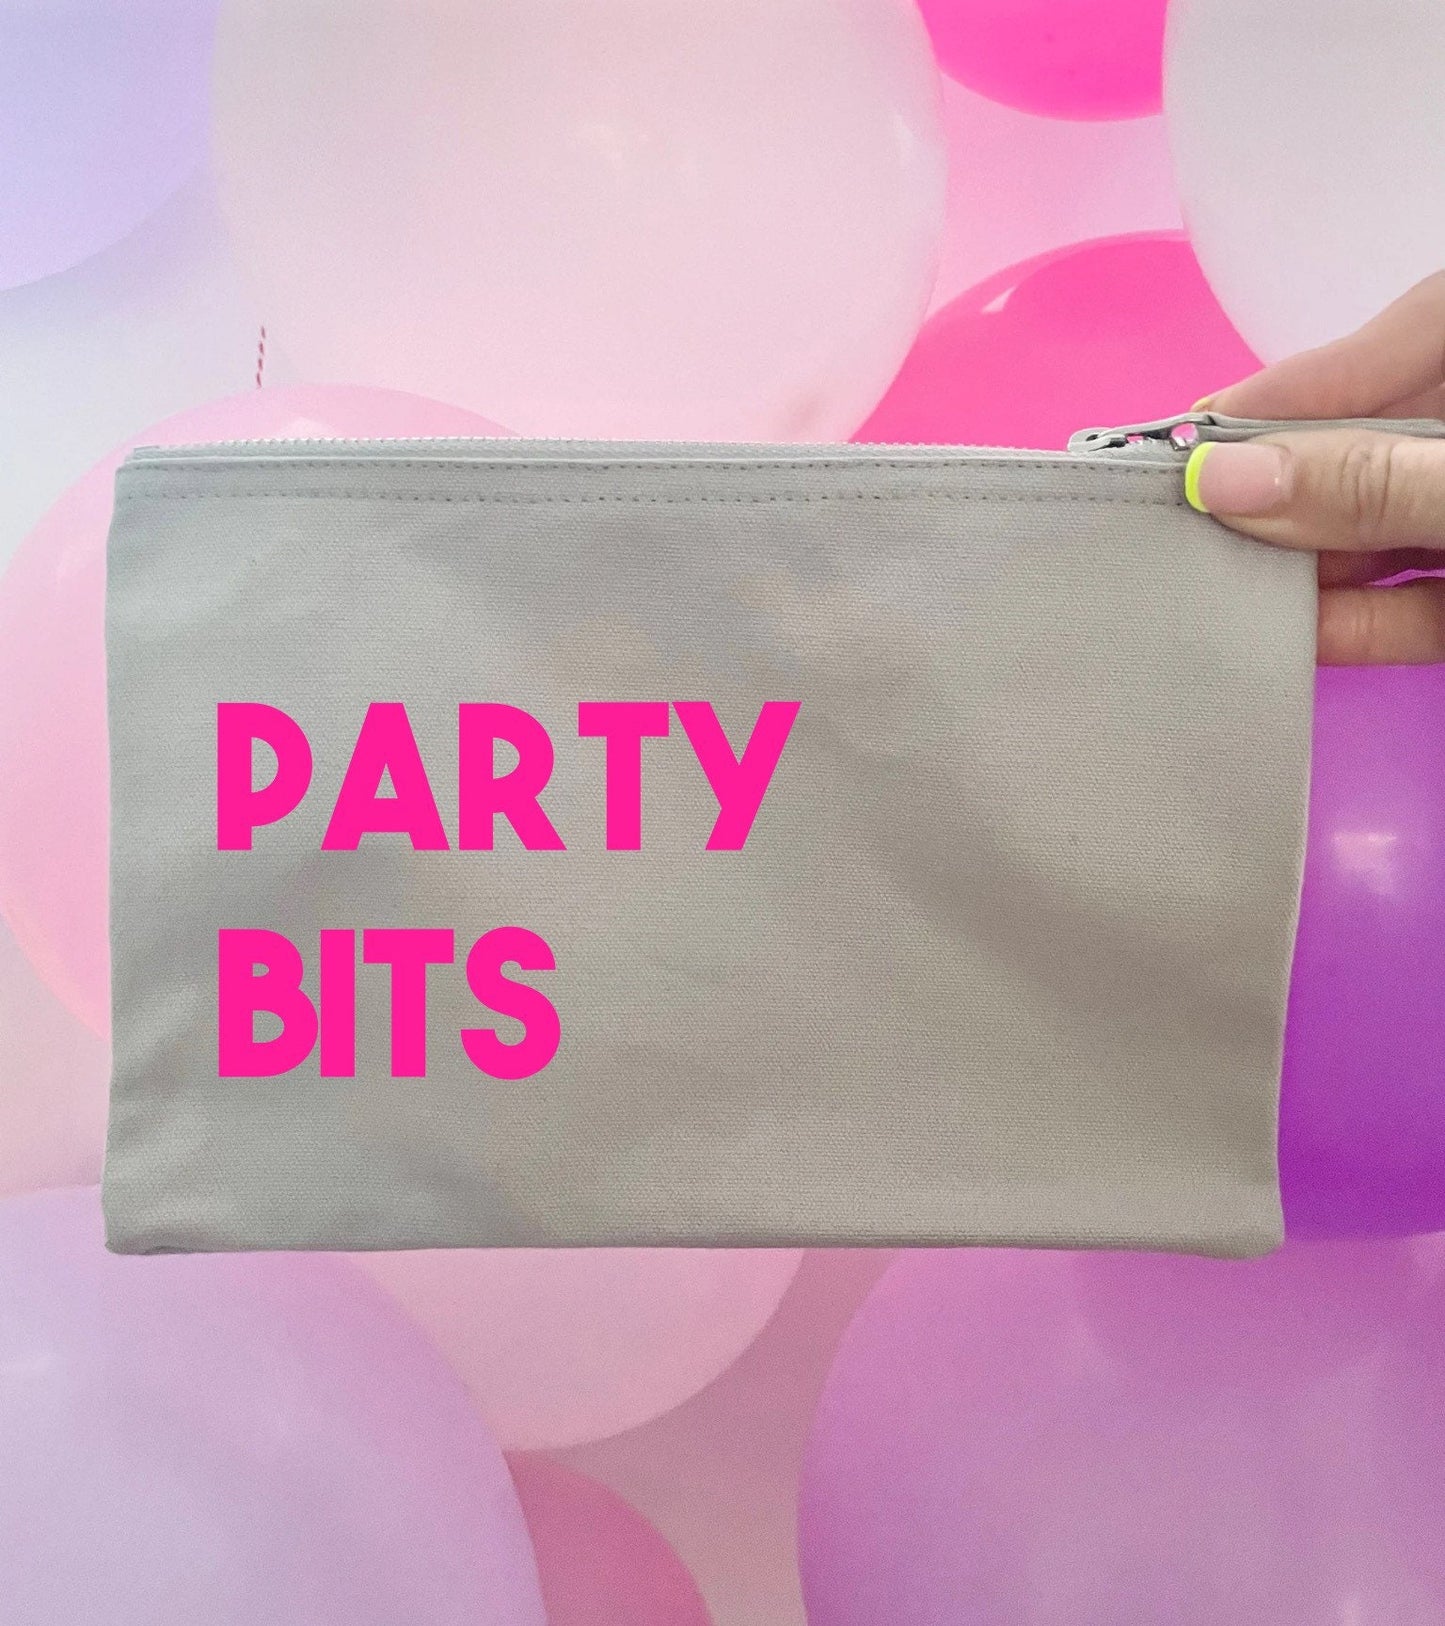 Party bits case, birthday cake candle storage, cotton pouch to store party essentials, balloons candles, cake toppers, banners